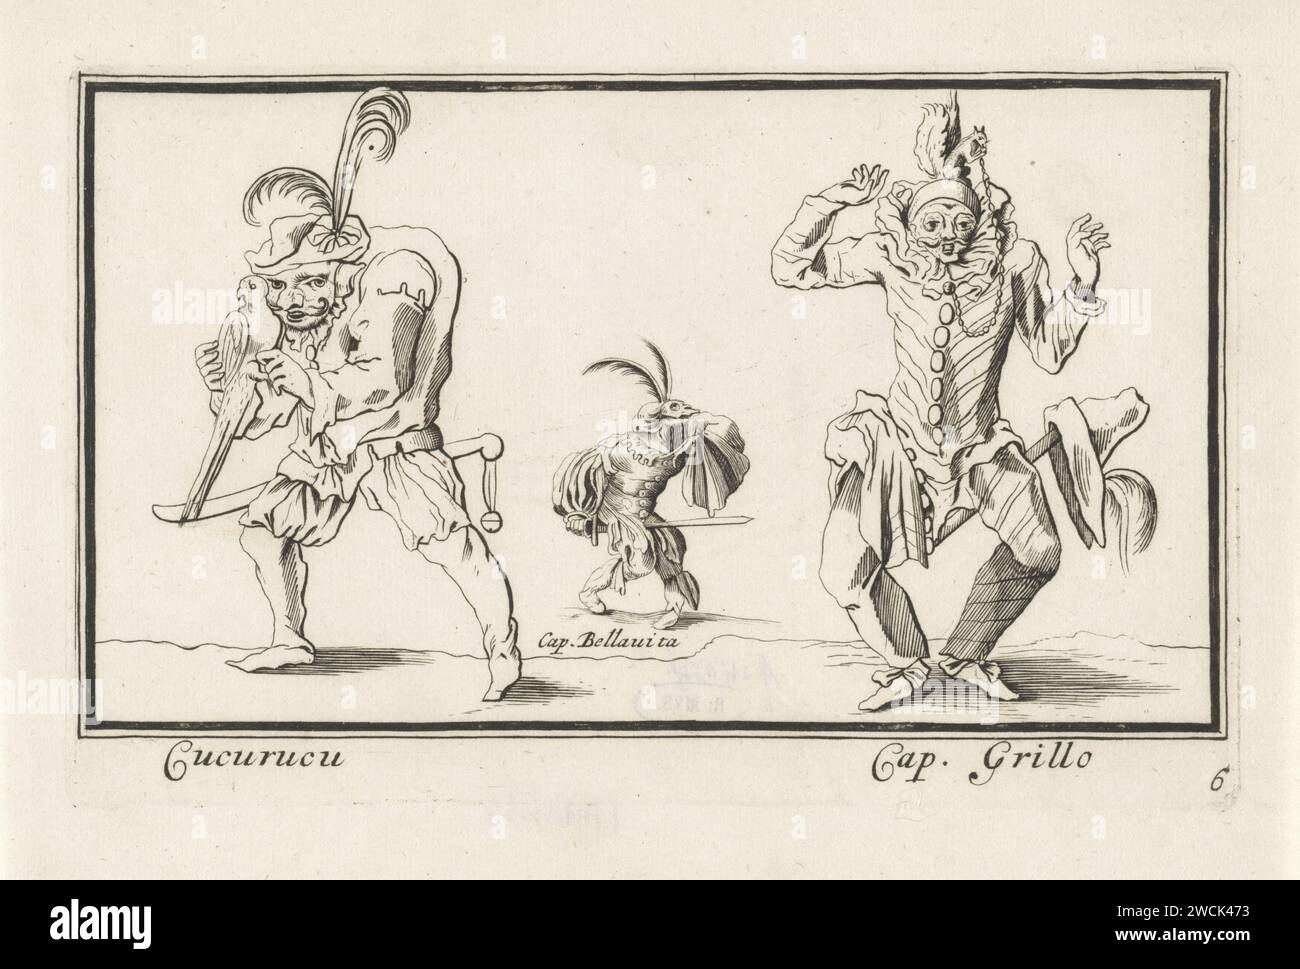 Shoreless, cap. Bellavita in Cap. Grillo, Anthorie de WINTER, after Jacques Callot, 1668 - 1707 print Three characters from the Commedia dell'arte. Left cucurucu with a parrot. In the middle cap. Bellavita with a sword between his legs and the right cap. Grillo with a squirrel on his head. Print Maker: Northern Netherlands Publisher: Amsterdam paper etching Types in 'Commedia dell'Arte' Stock Photo